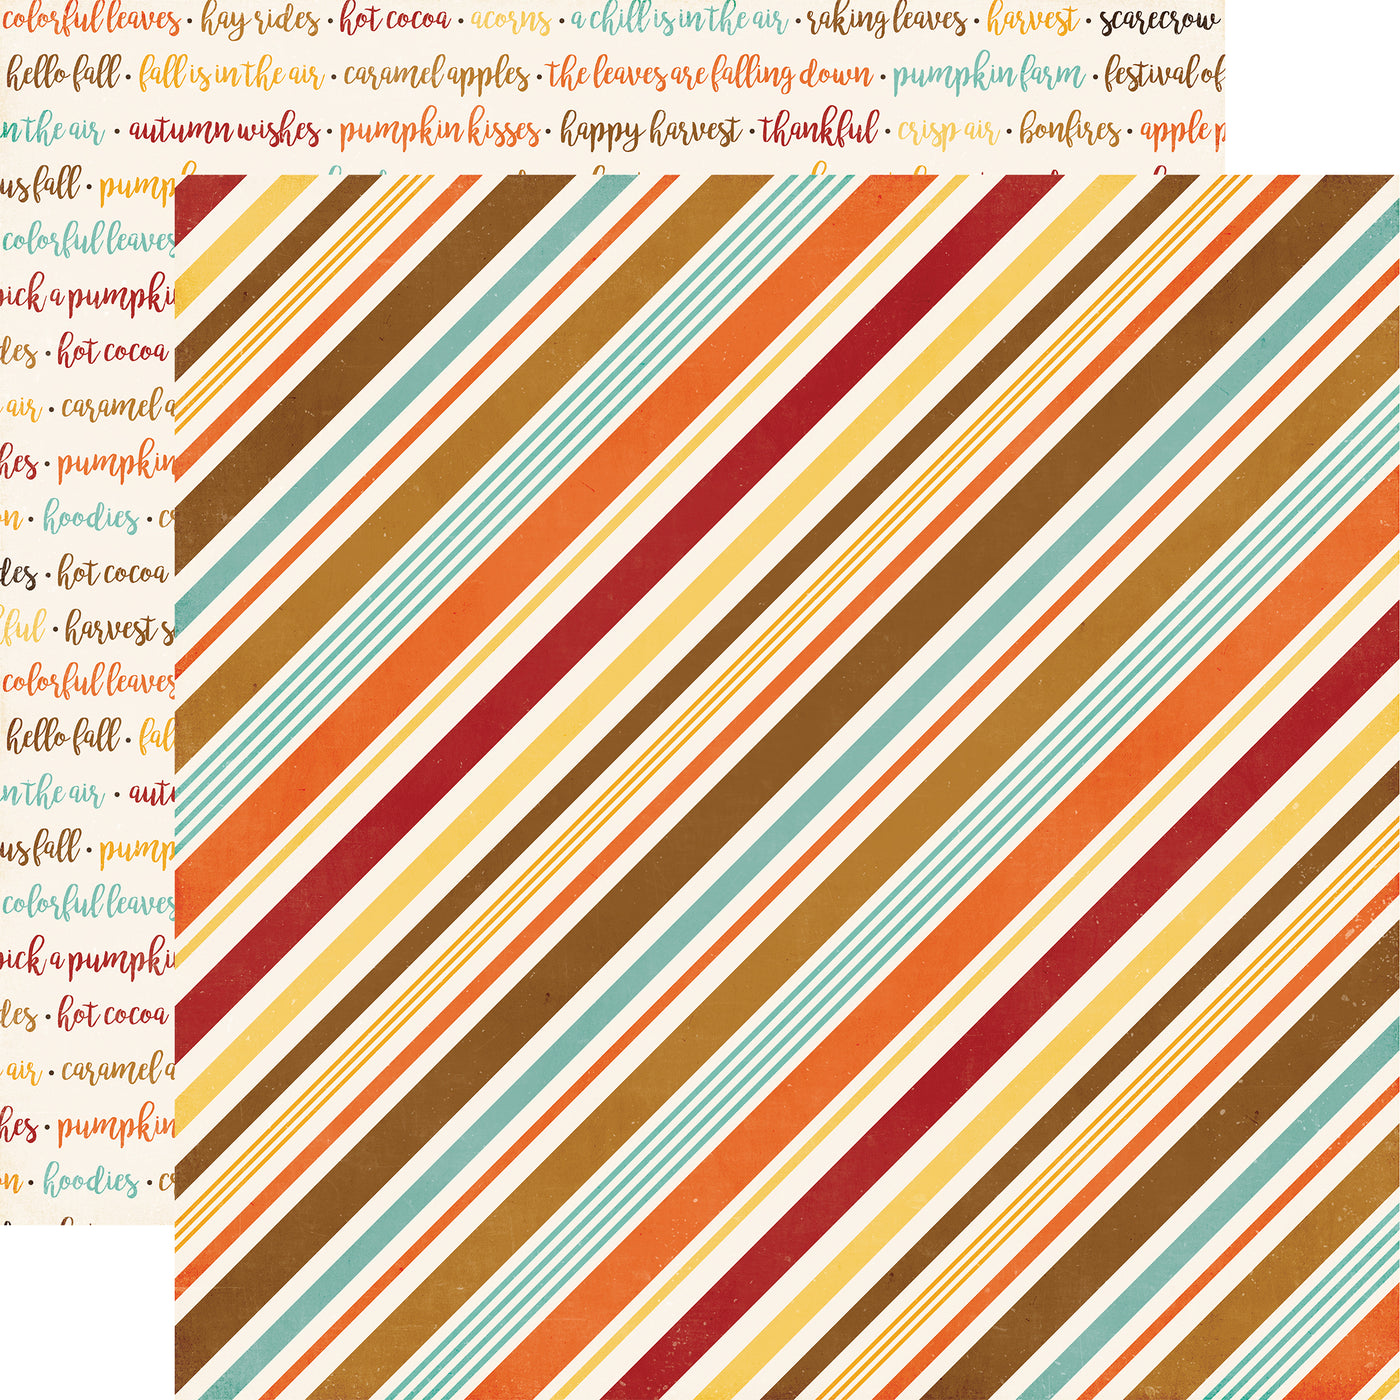 Multi-Colored (Side A - stripes in fall colors on a cream background, Side B - fall phrases in bold fall colors on a cream background)